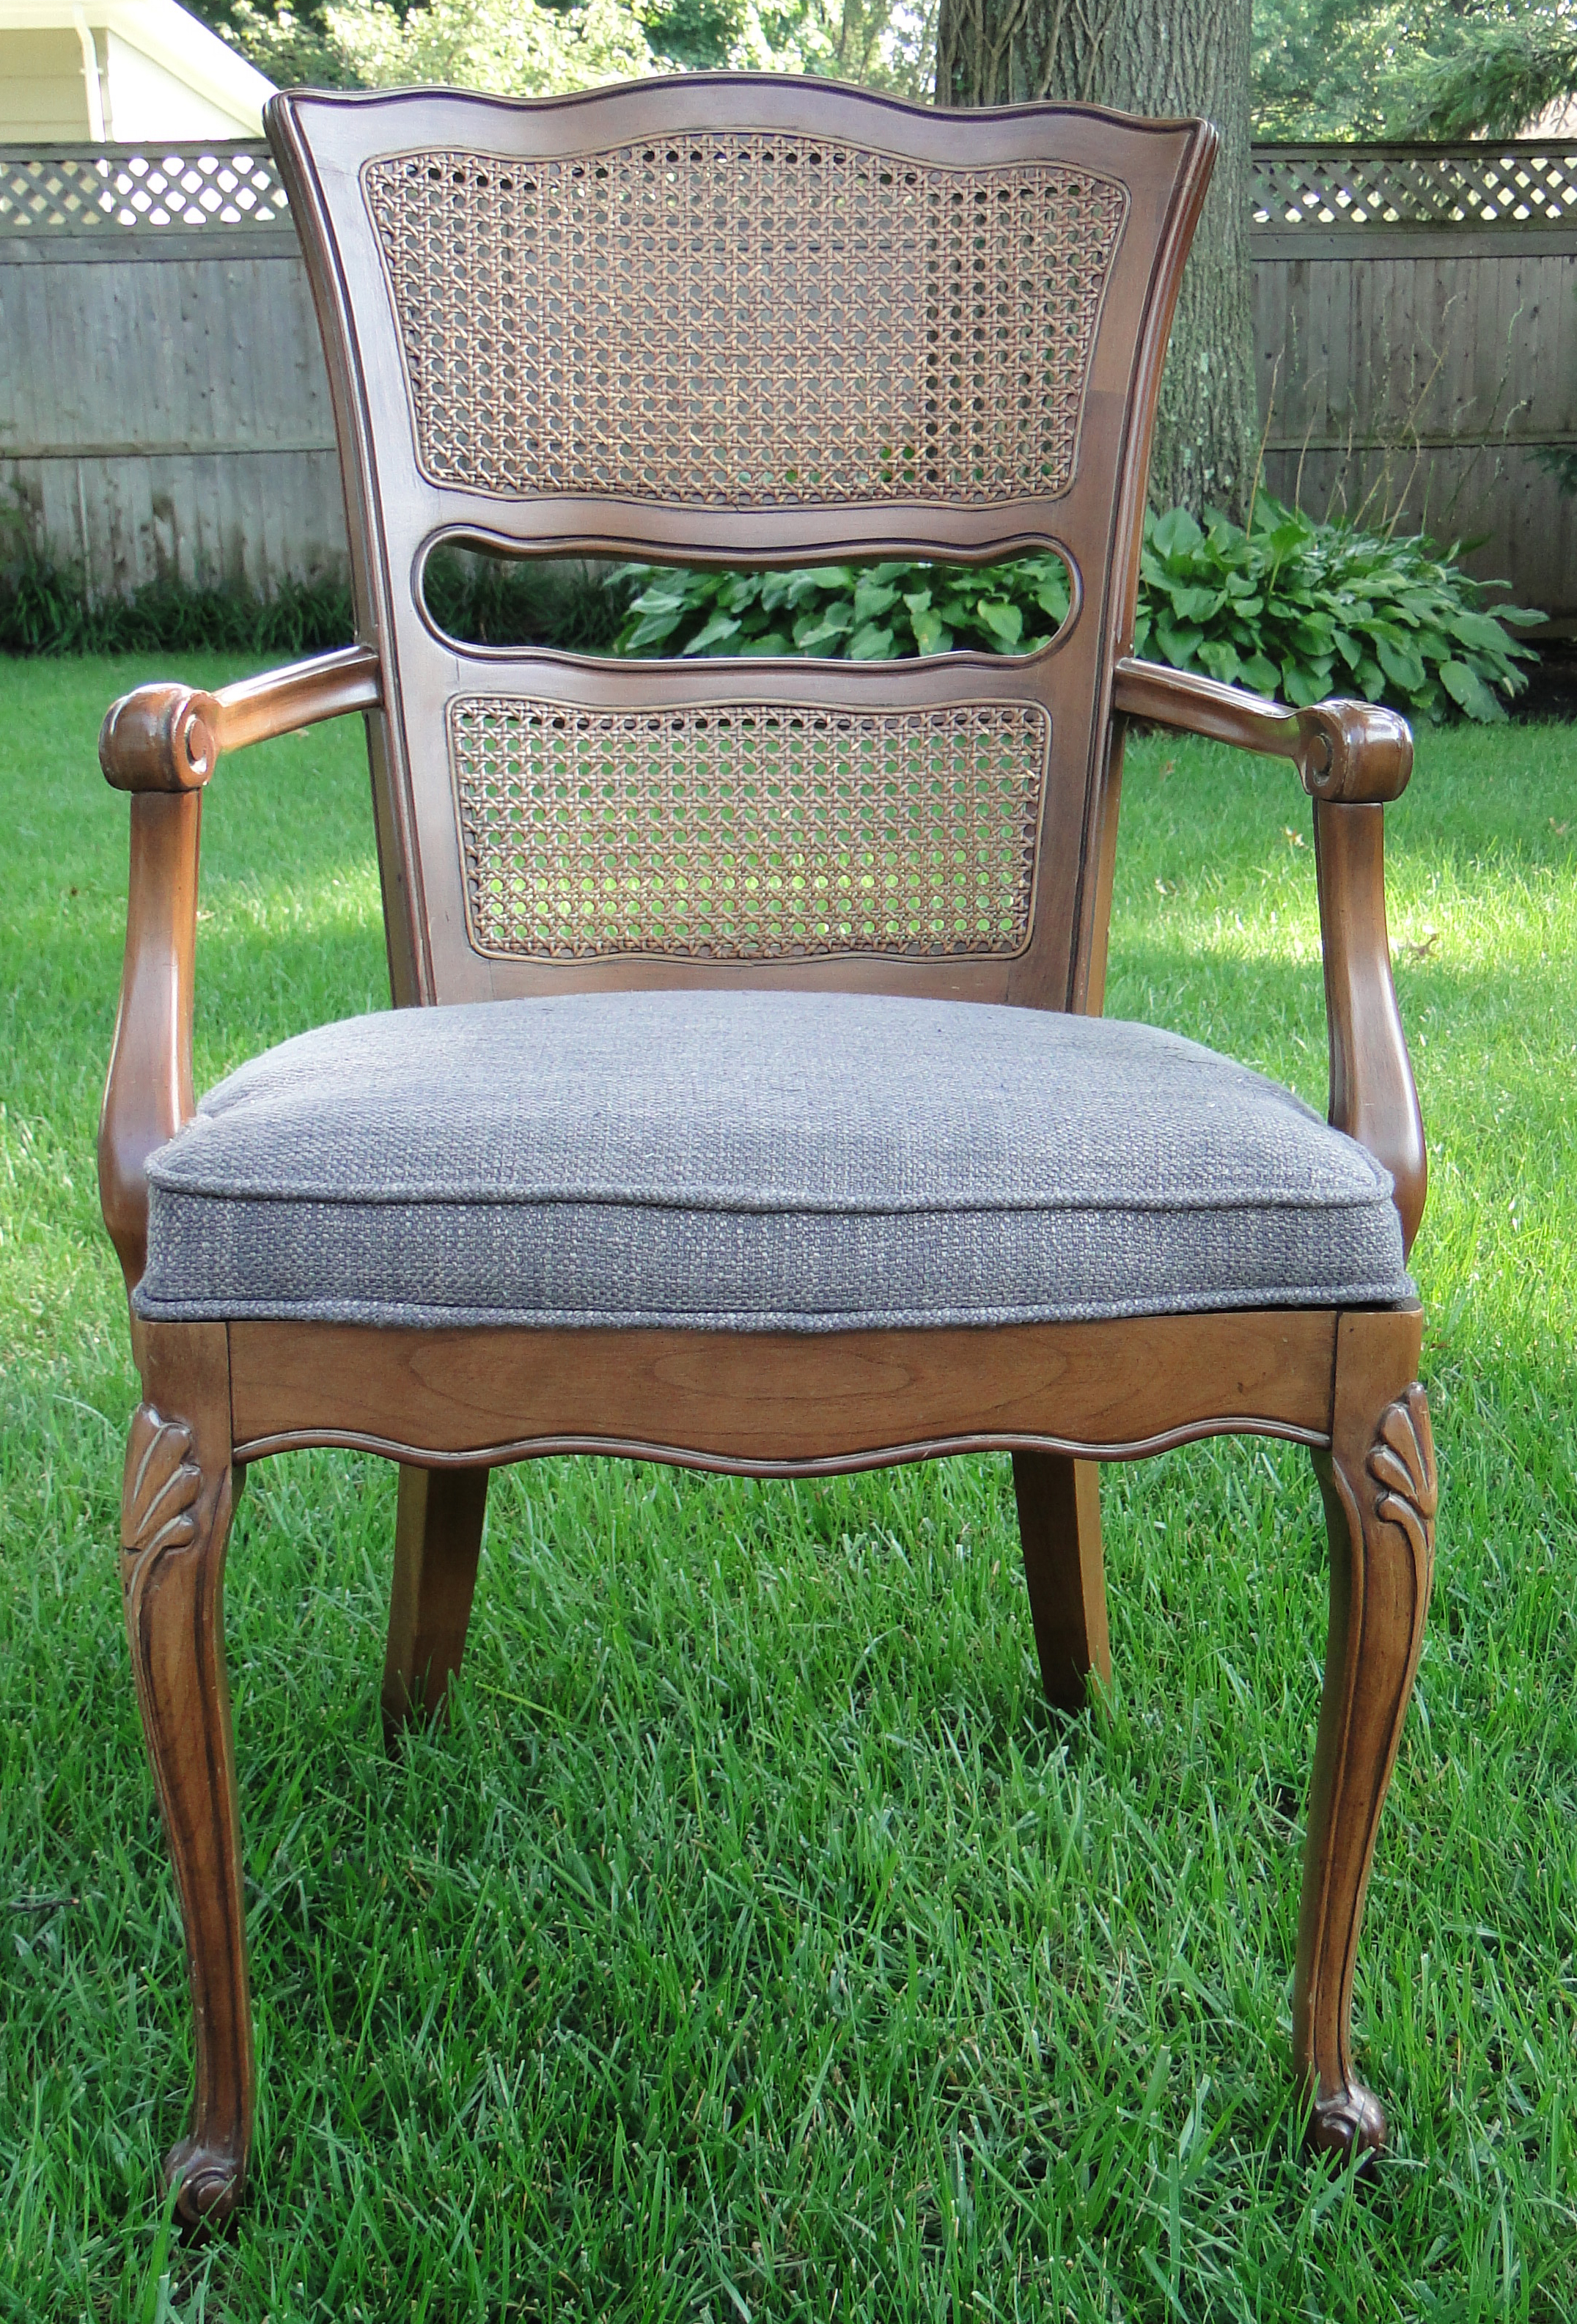 Front view of one chair